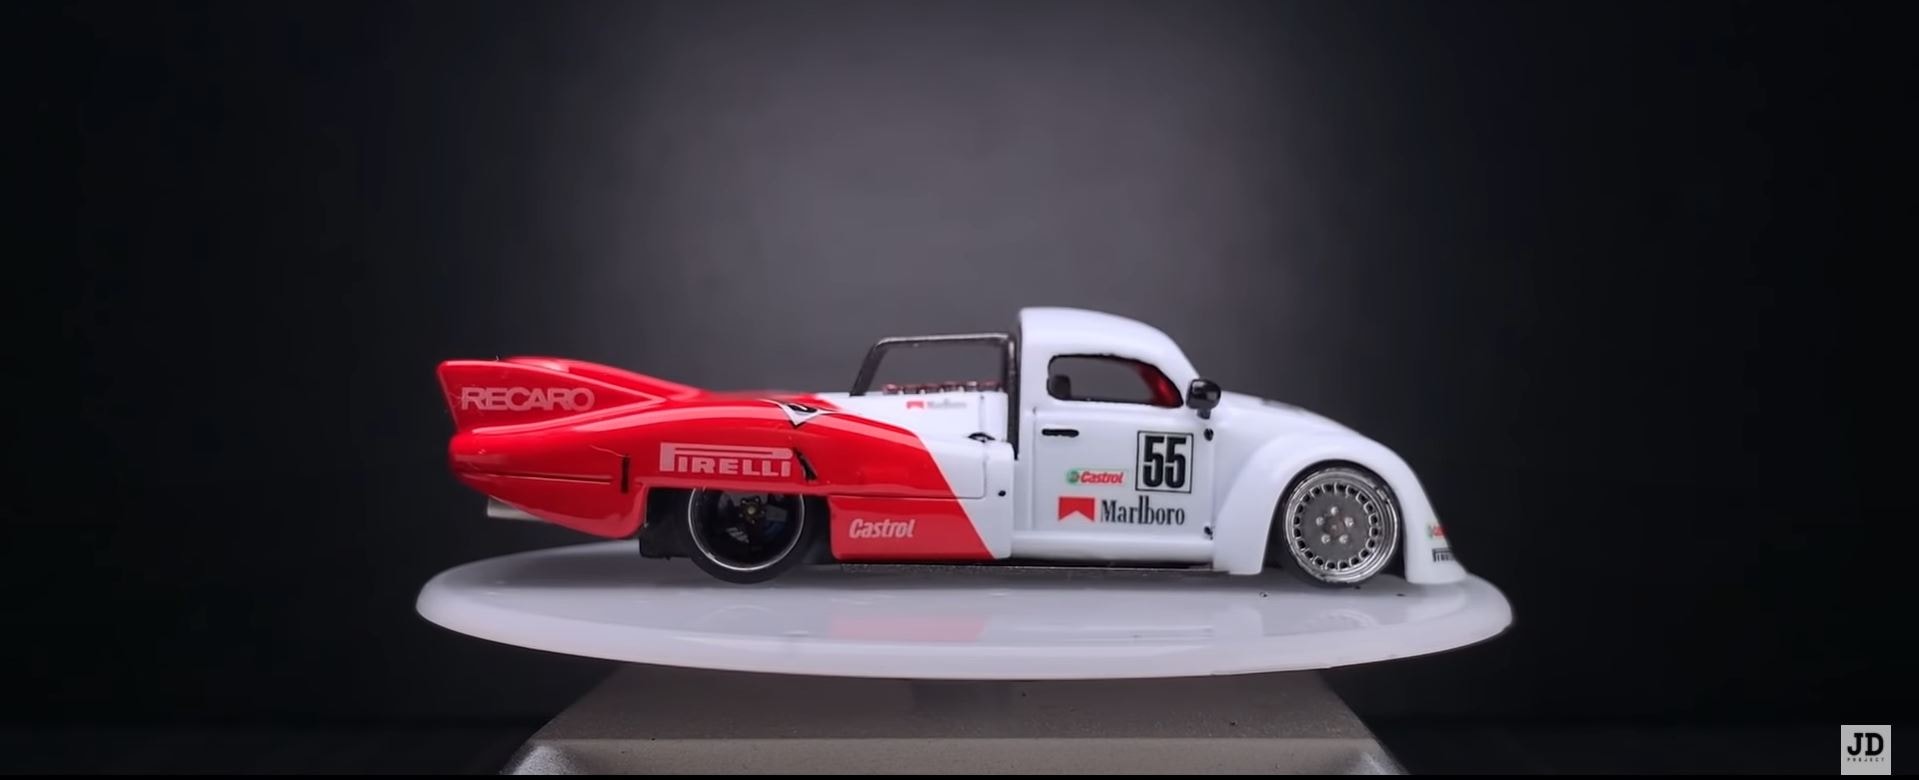 photo of VW Beetle Fuses With Porsche 917LH, Looks Ready to Rock image